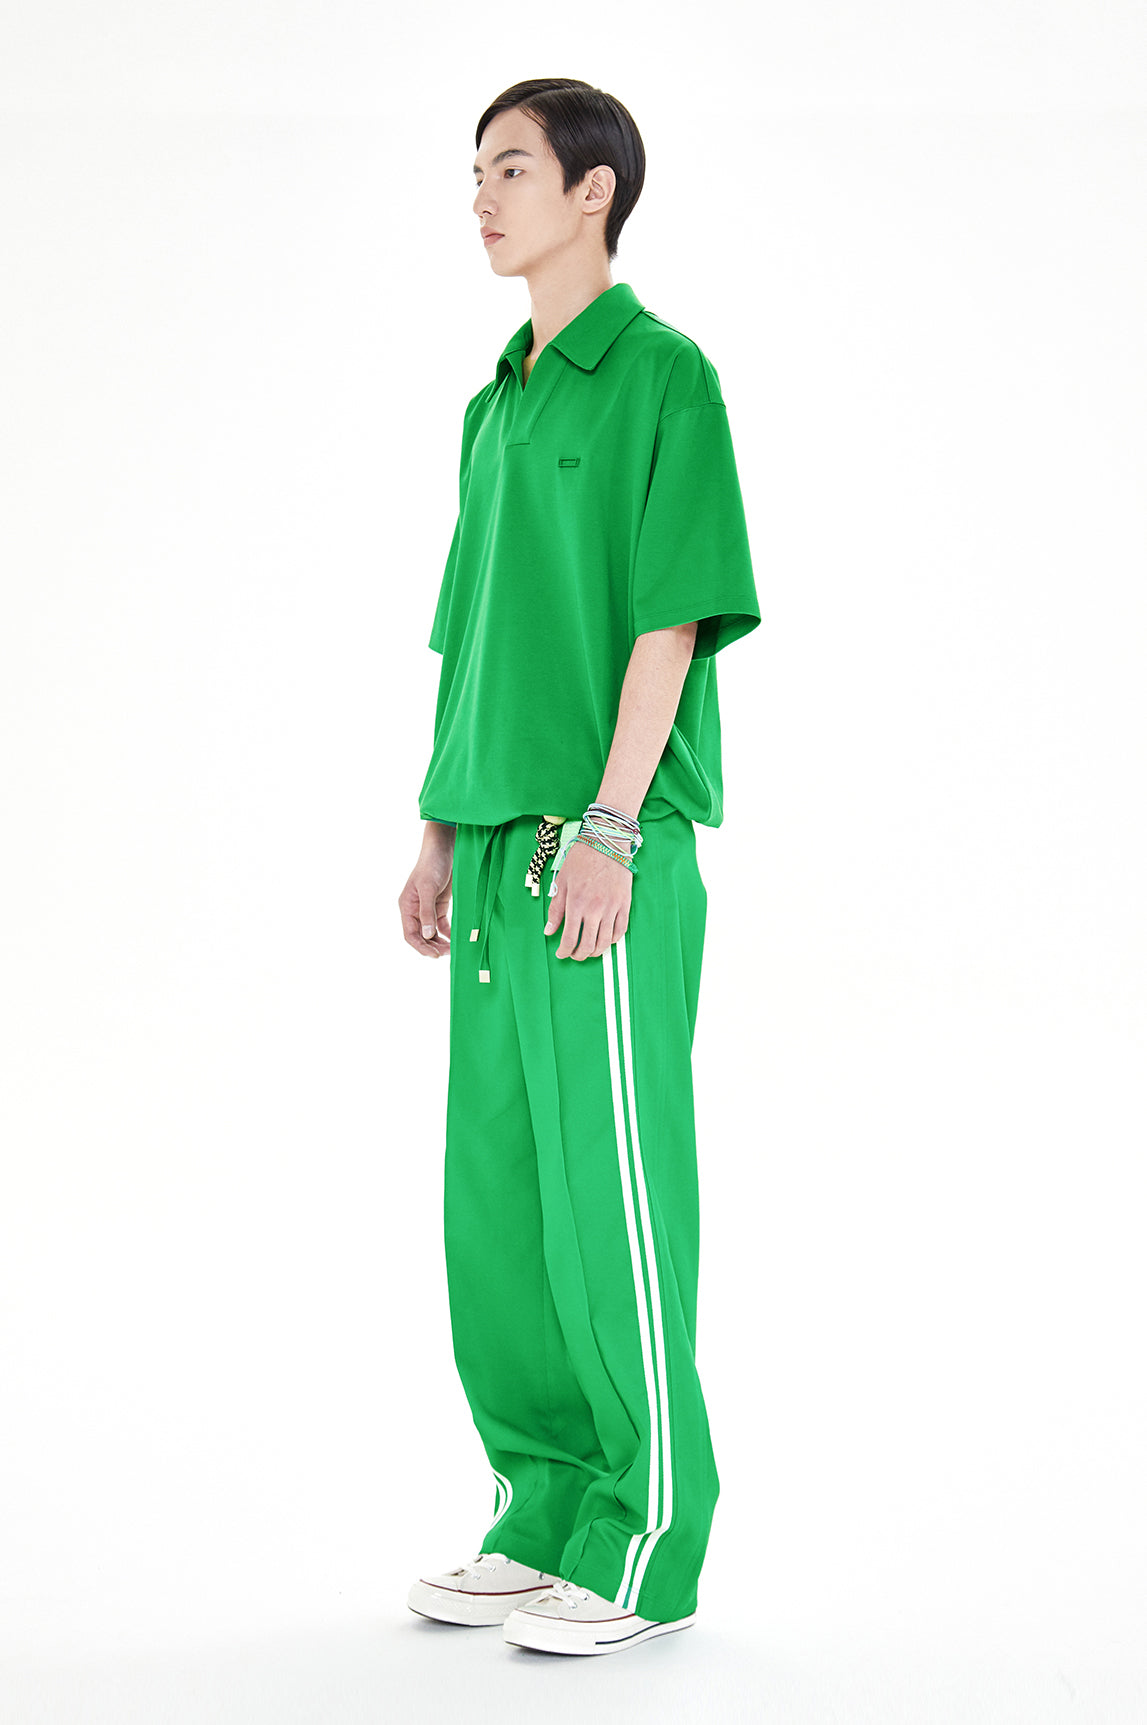 Wide track pants (Bright green)